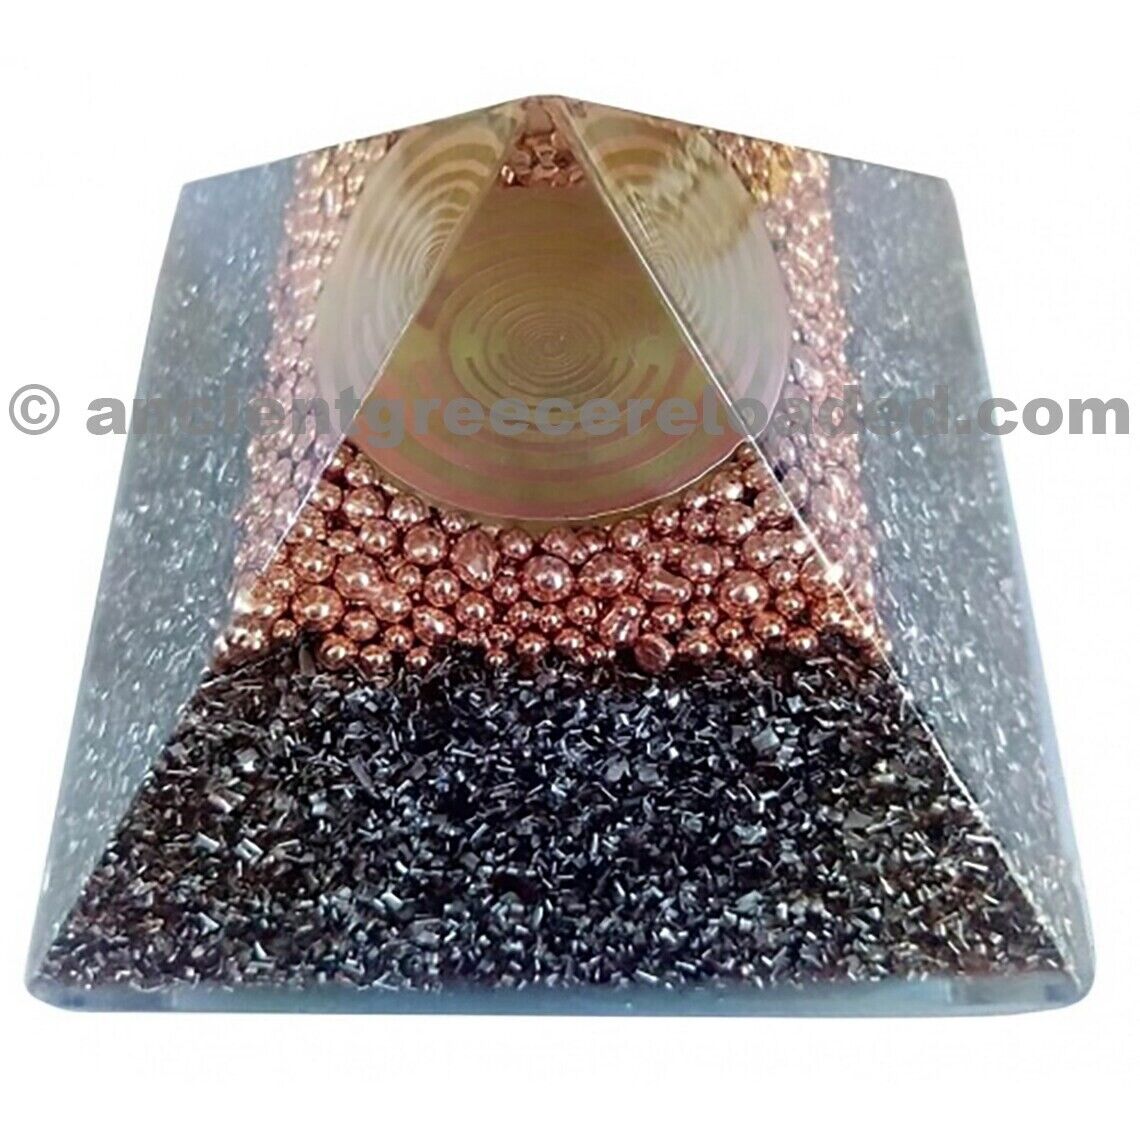 Orgone - Cheops Emblem of Ether, Orgone Pyramid with the Double Wave Oscillator